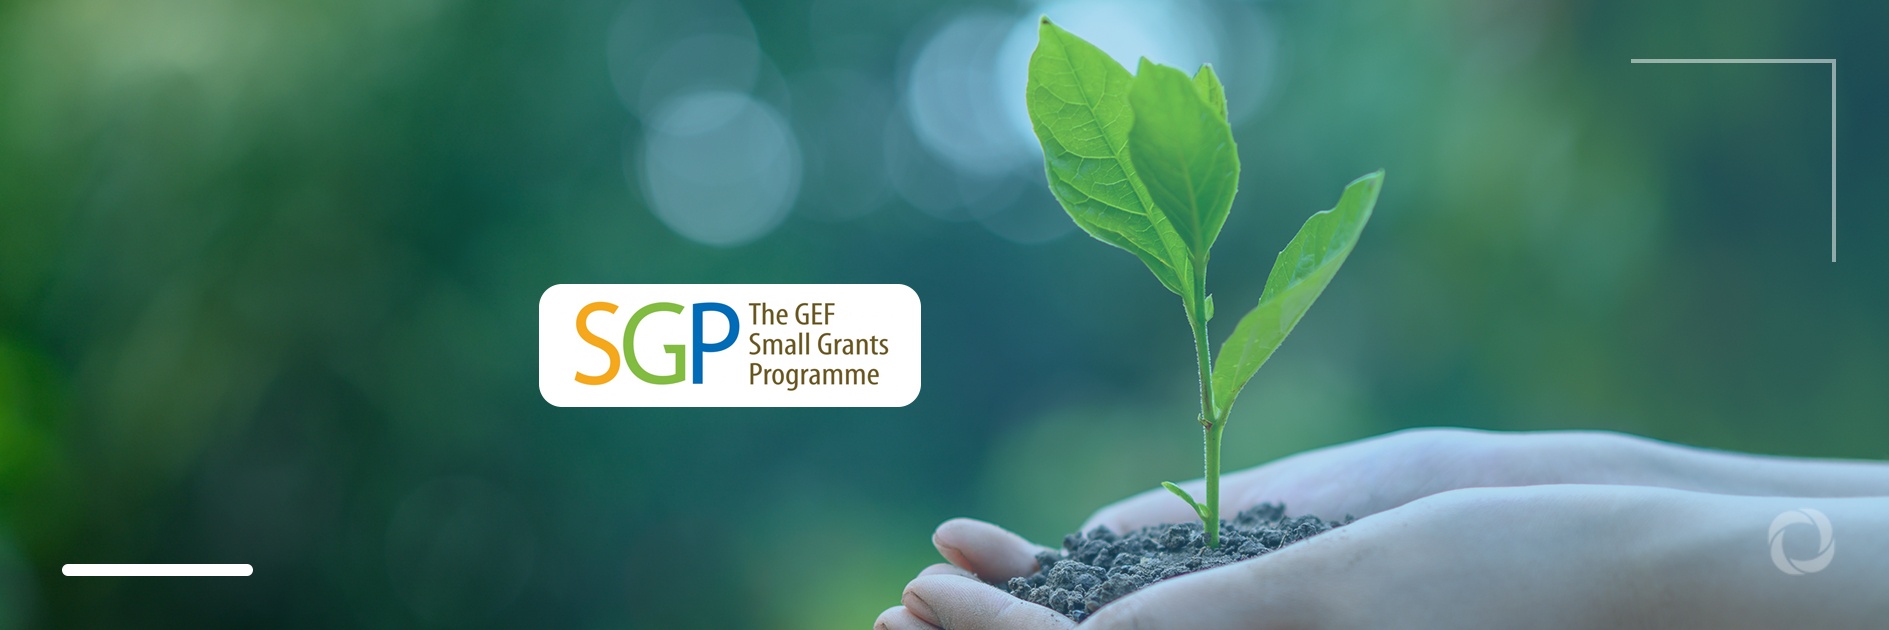 GEF Small Grants Programme offers millions of dollars to address environmental issues